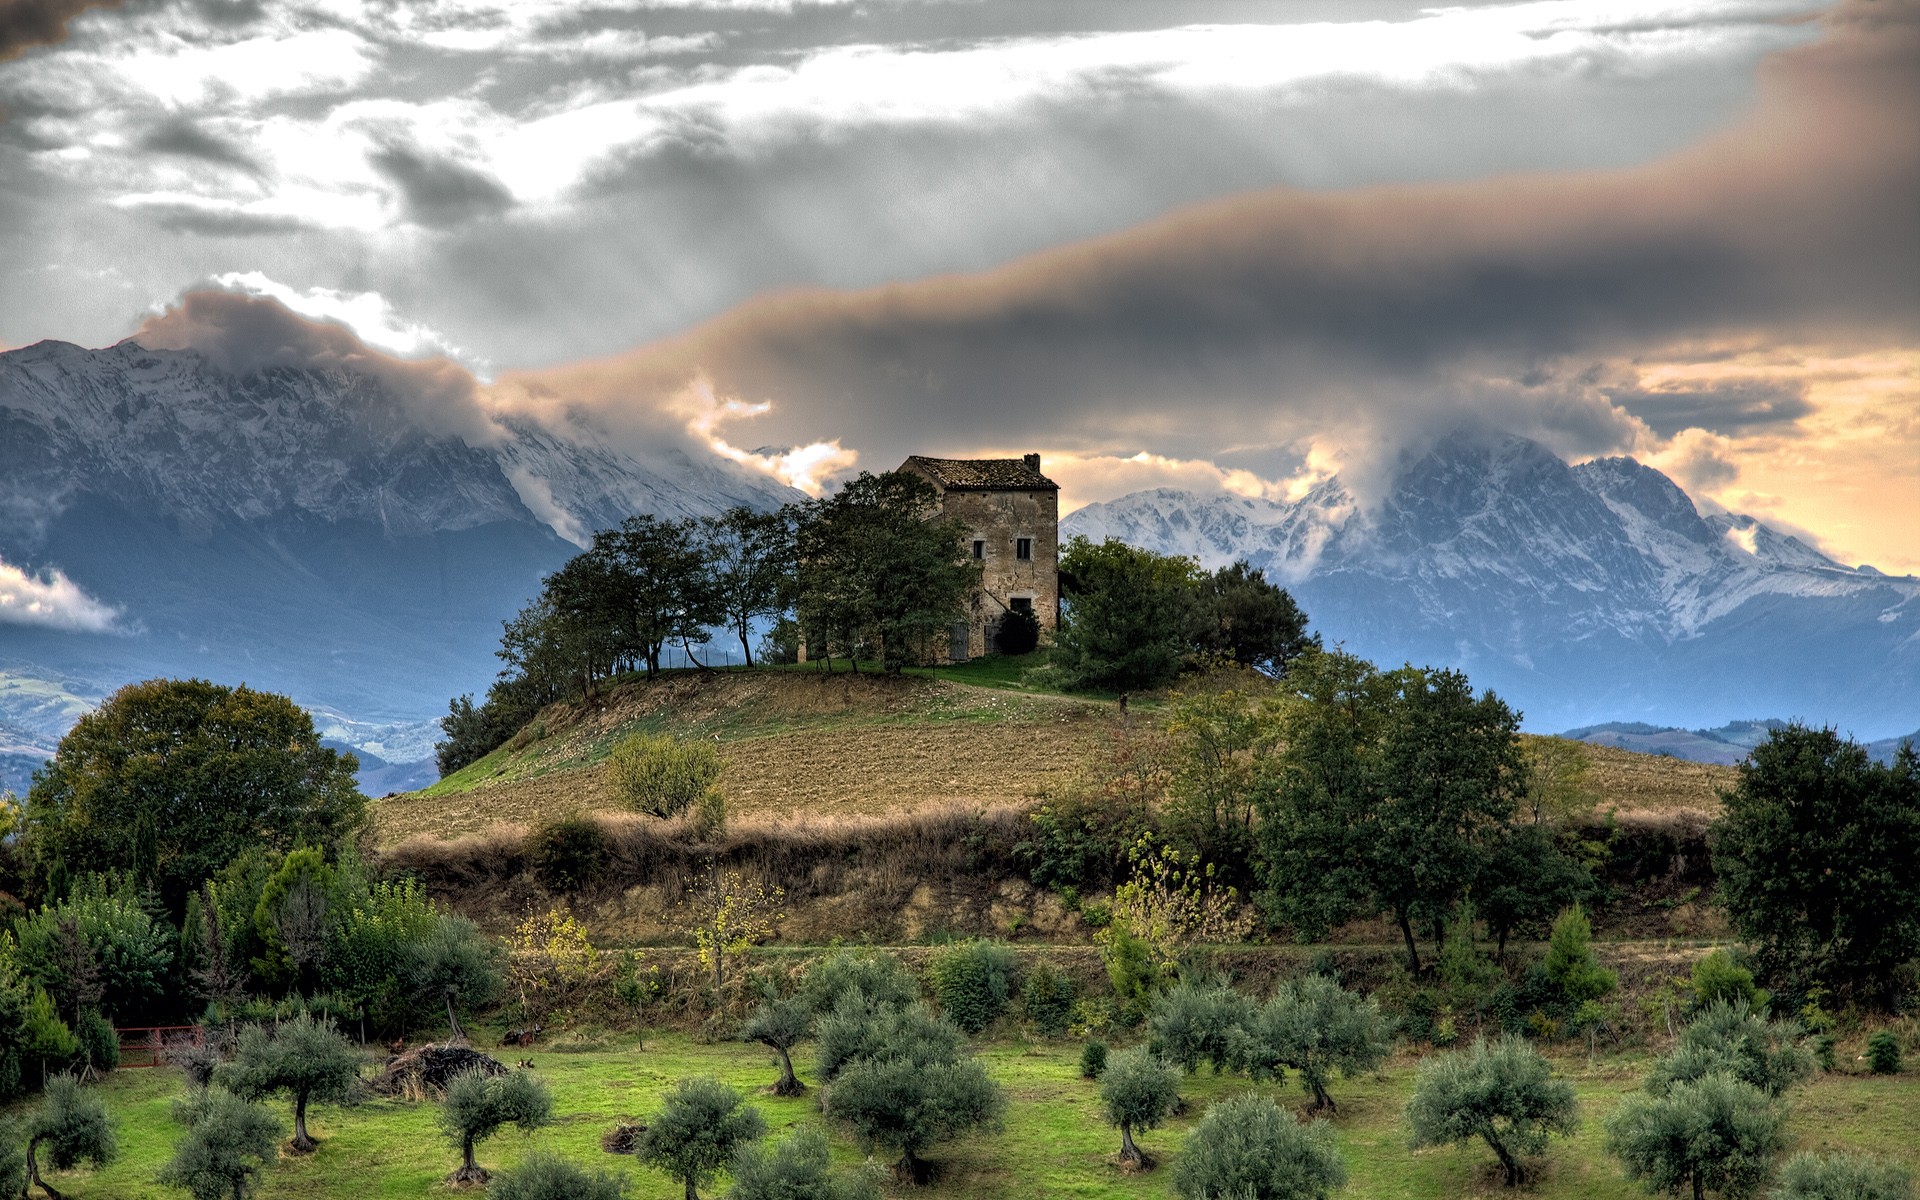 General 1920x1200 landscape nature sky HDR architecture old building hills trees house mountains snowy peak clouds ruins snowy mountain Italy